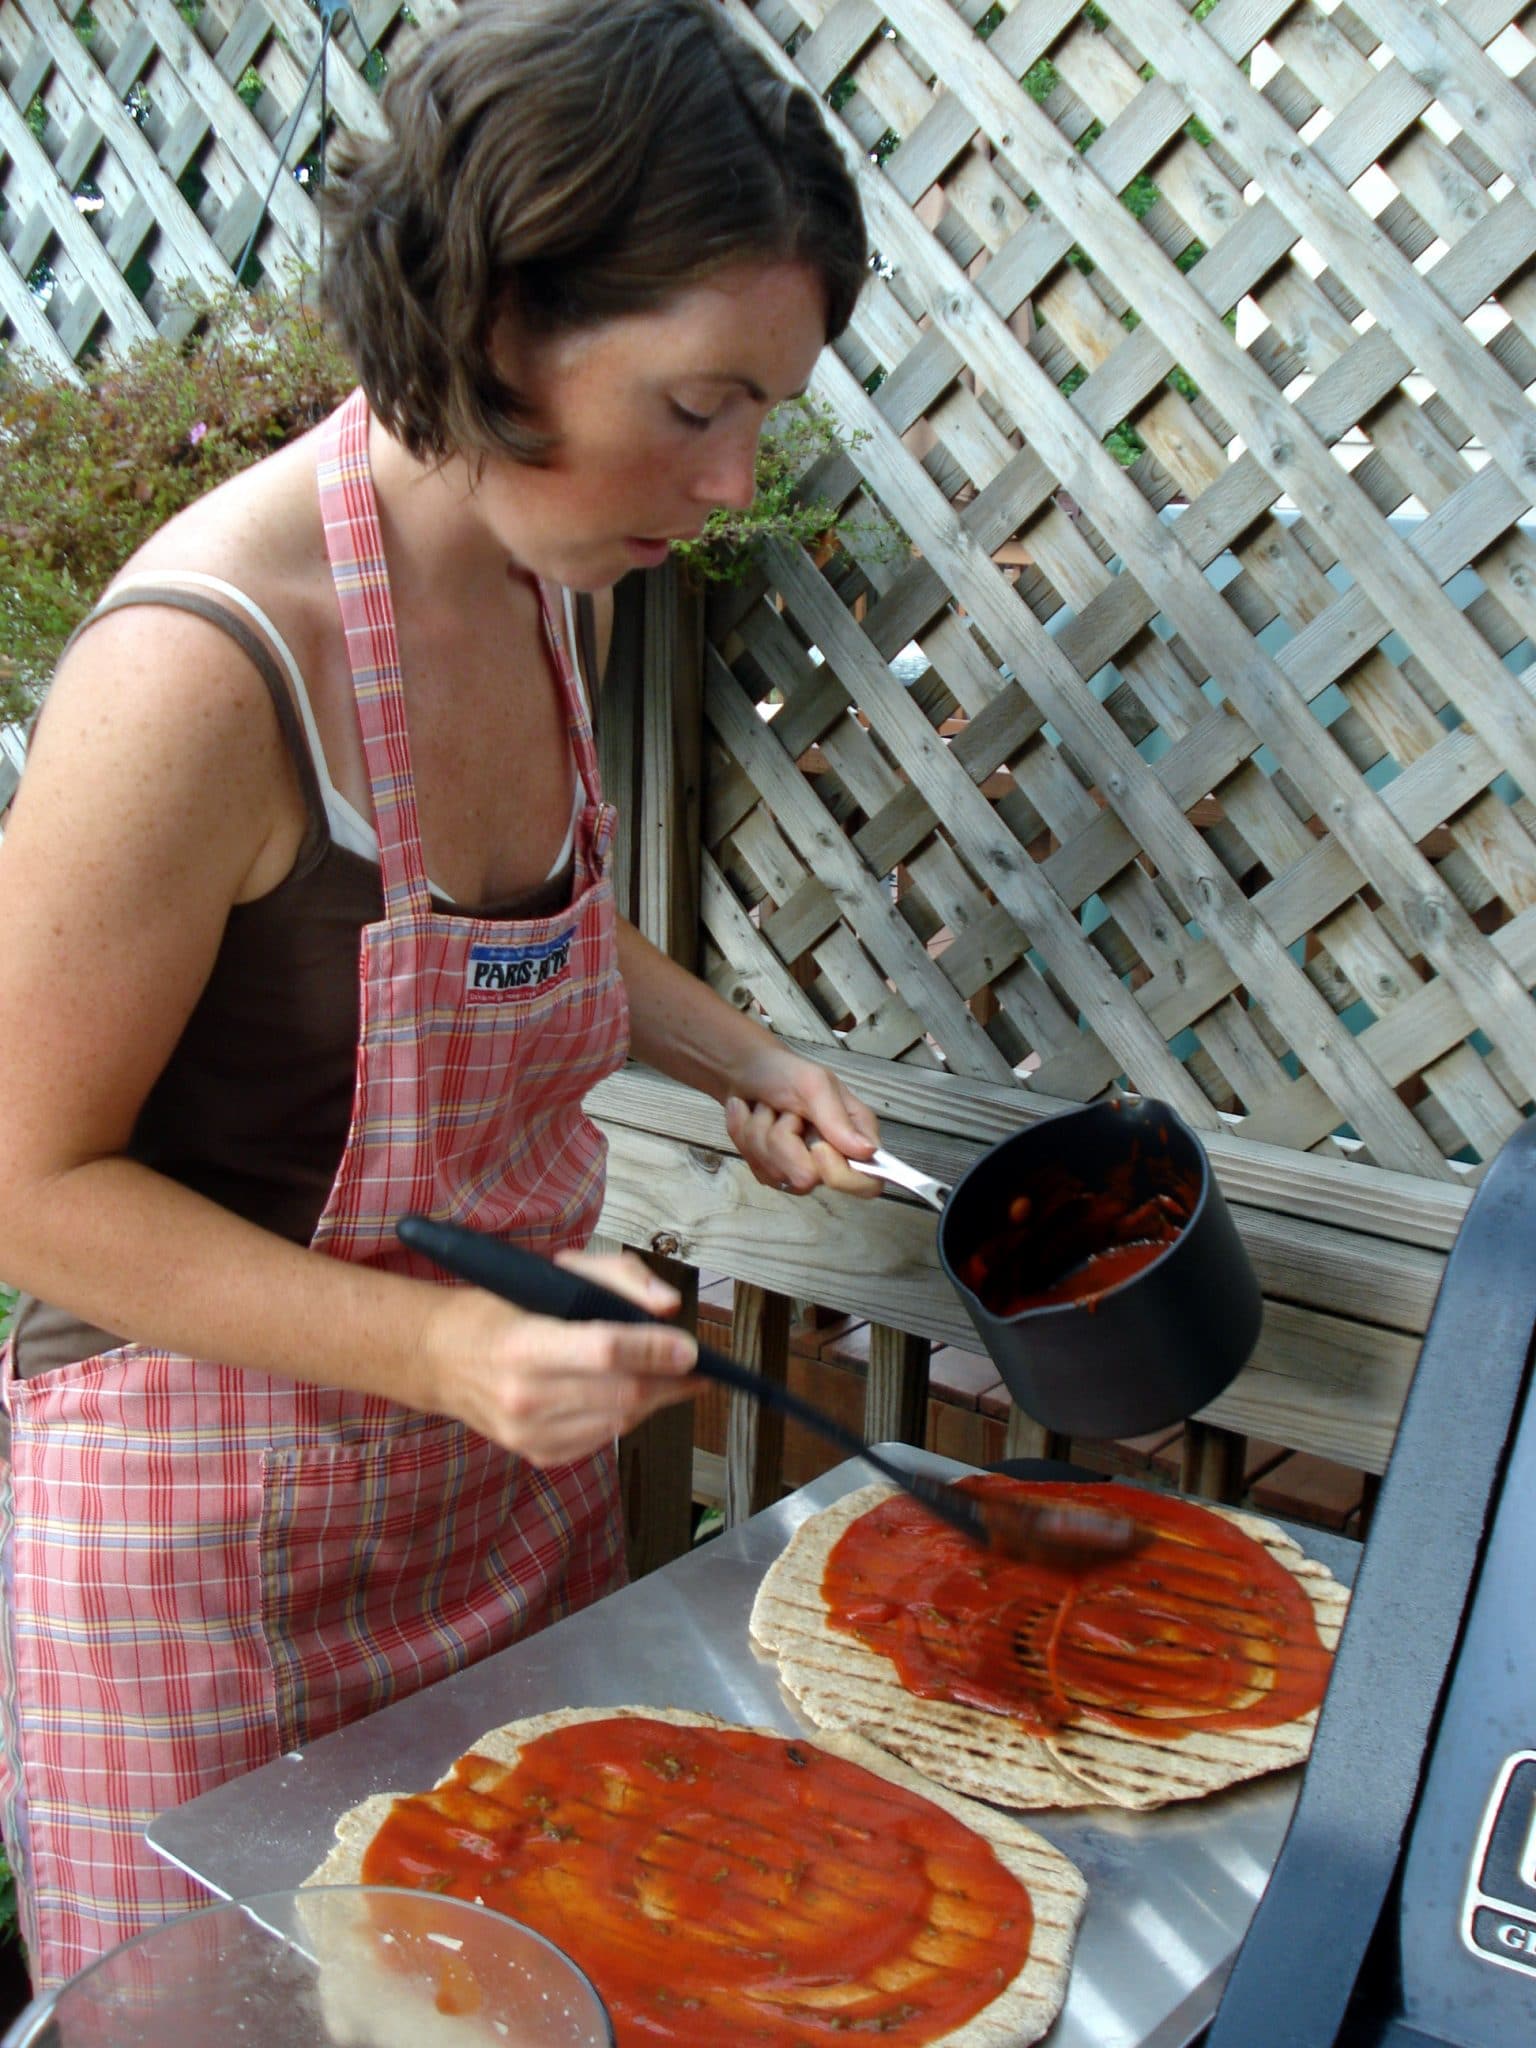 Erin saucing pizzas for grilling